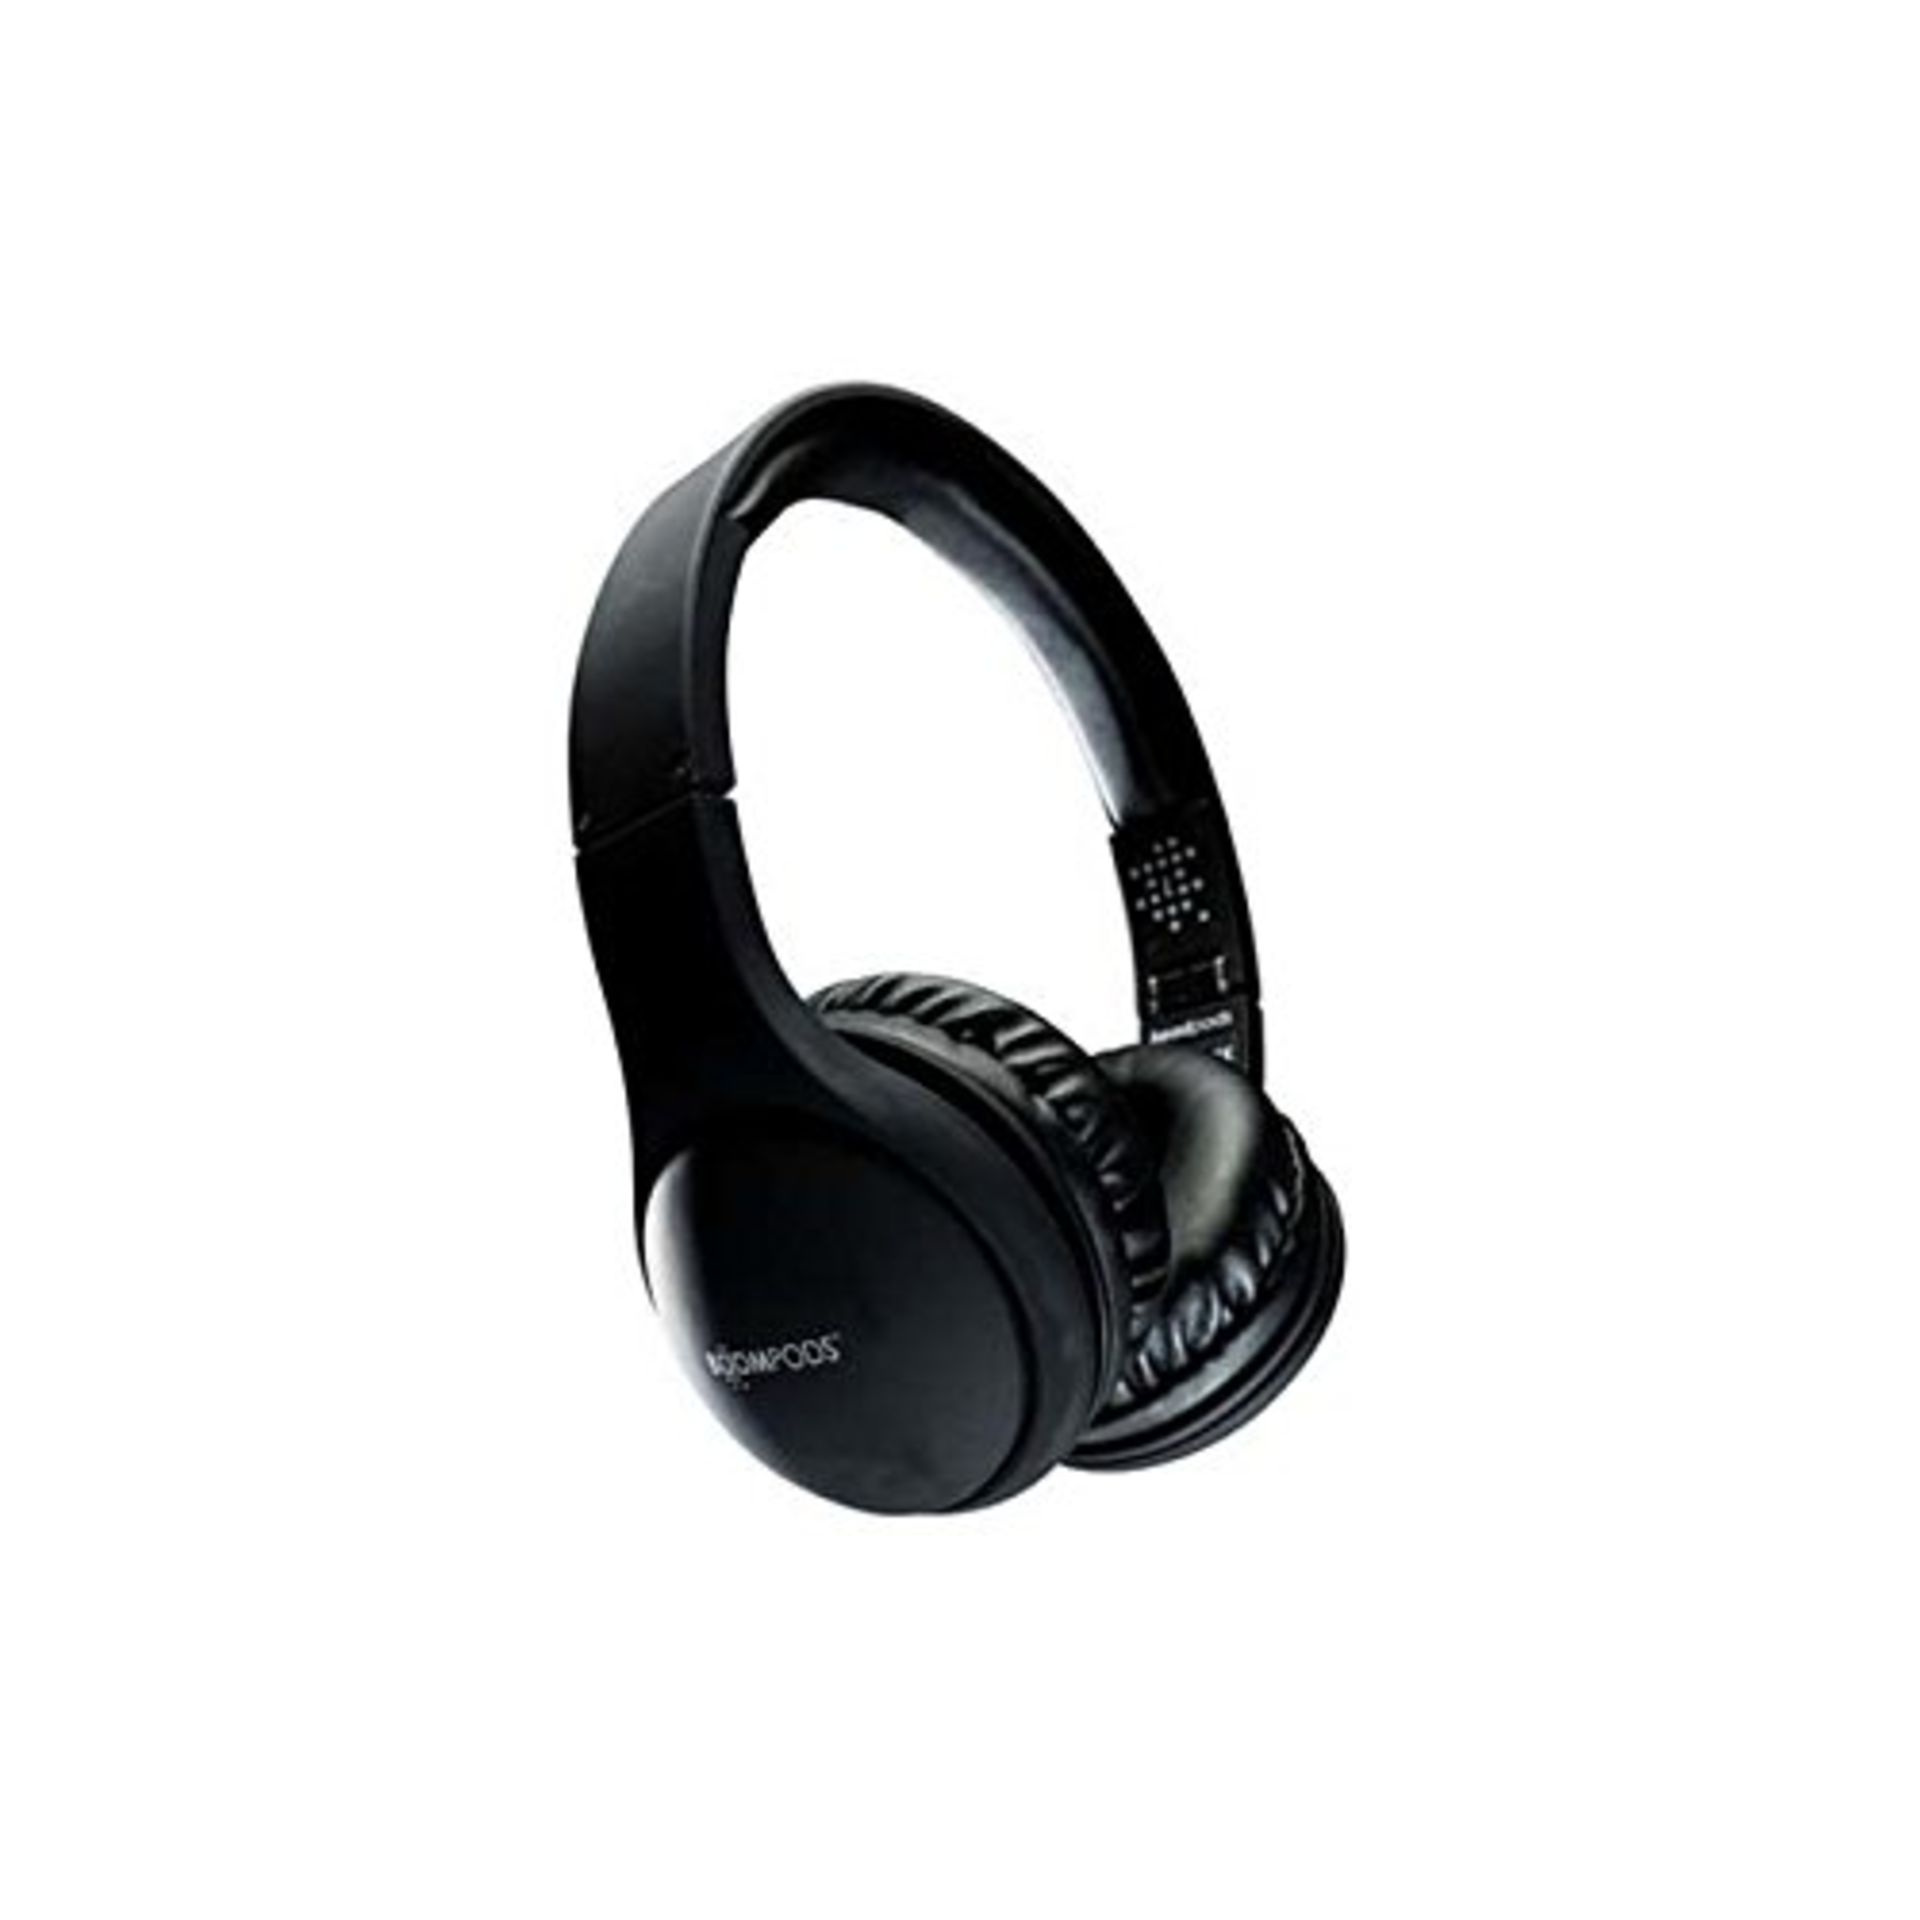 V *TRADE QTY* Brand New Headpods Folding Stereo Headphones With Remote And Mic And Travel Case